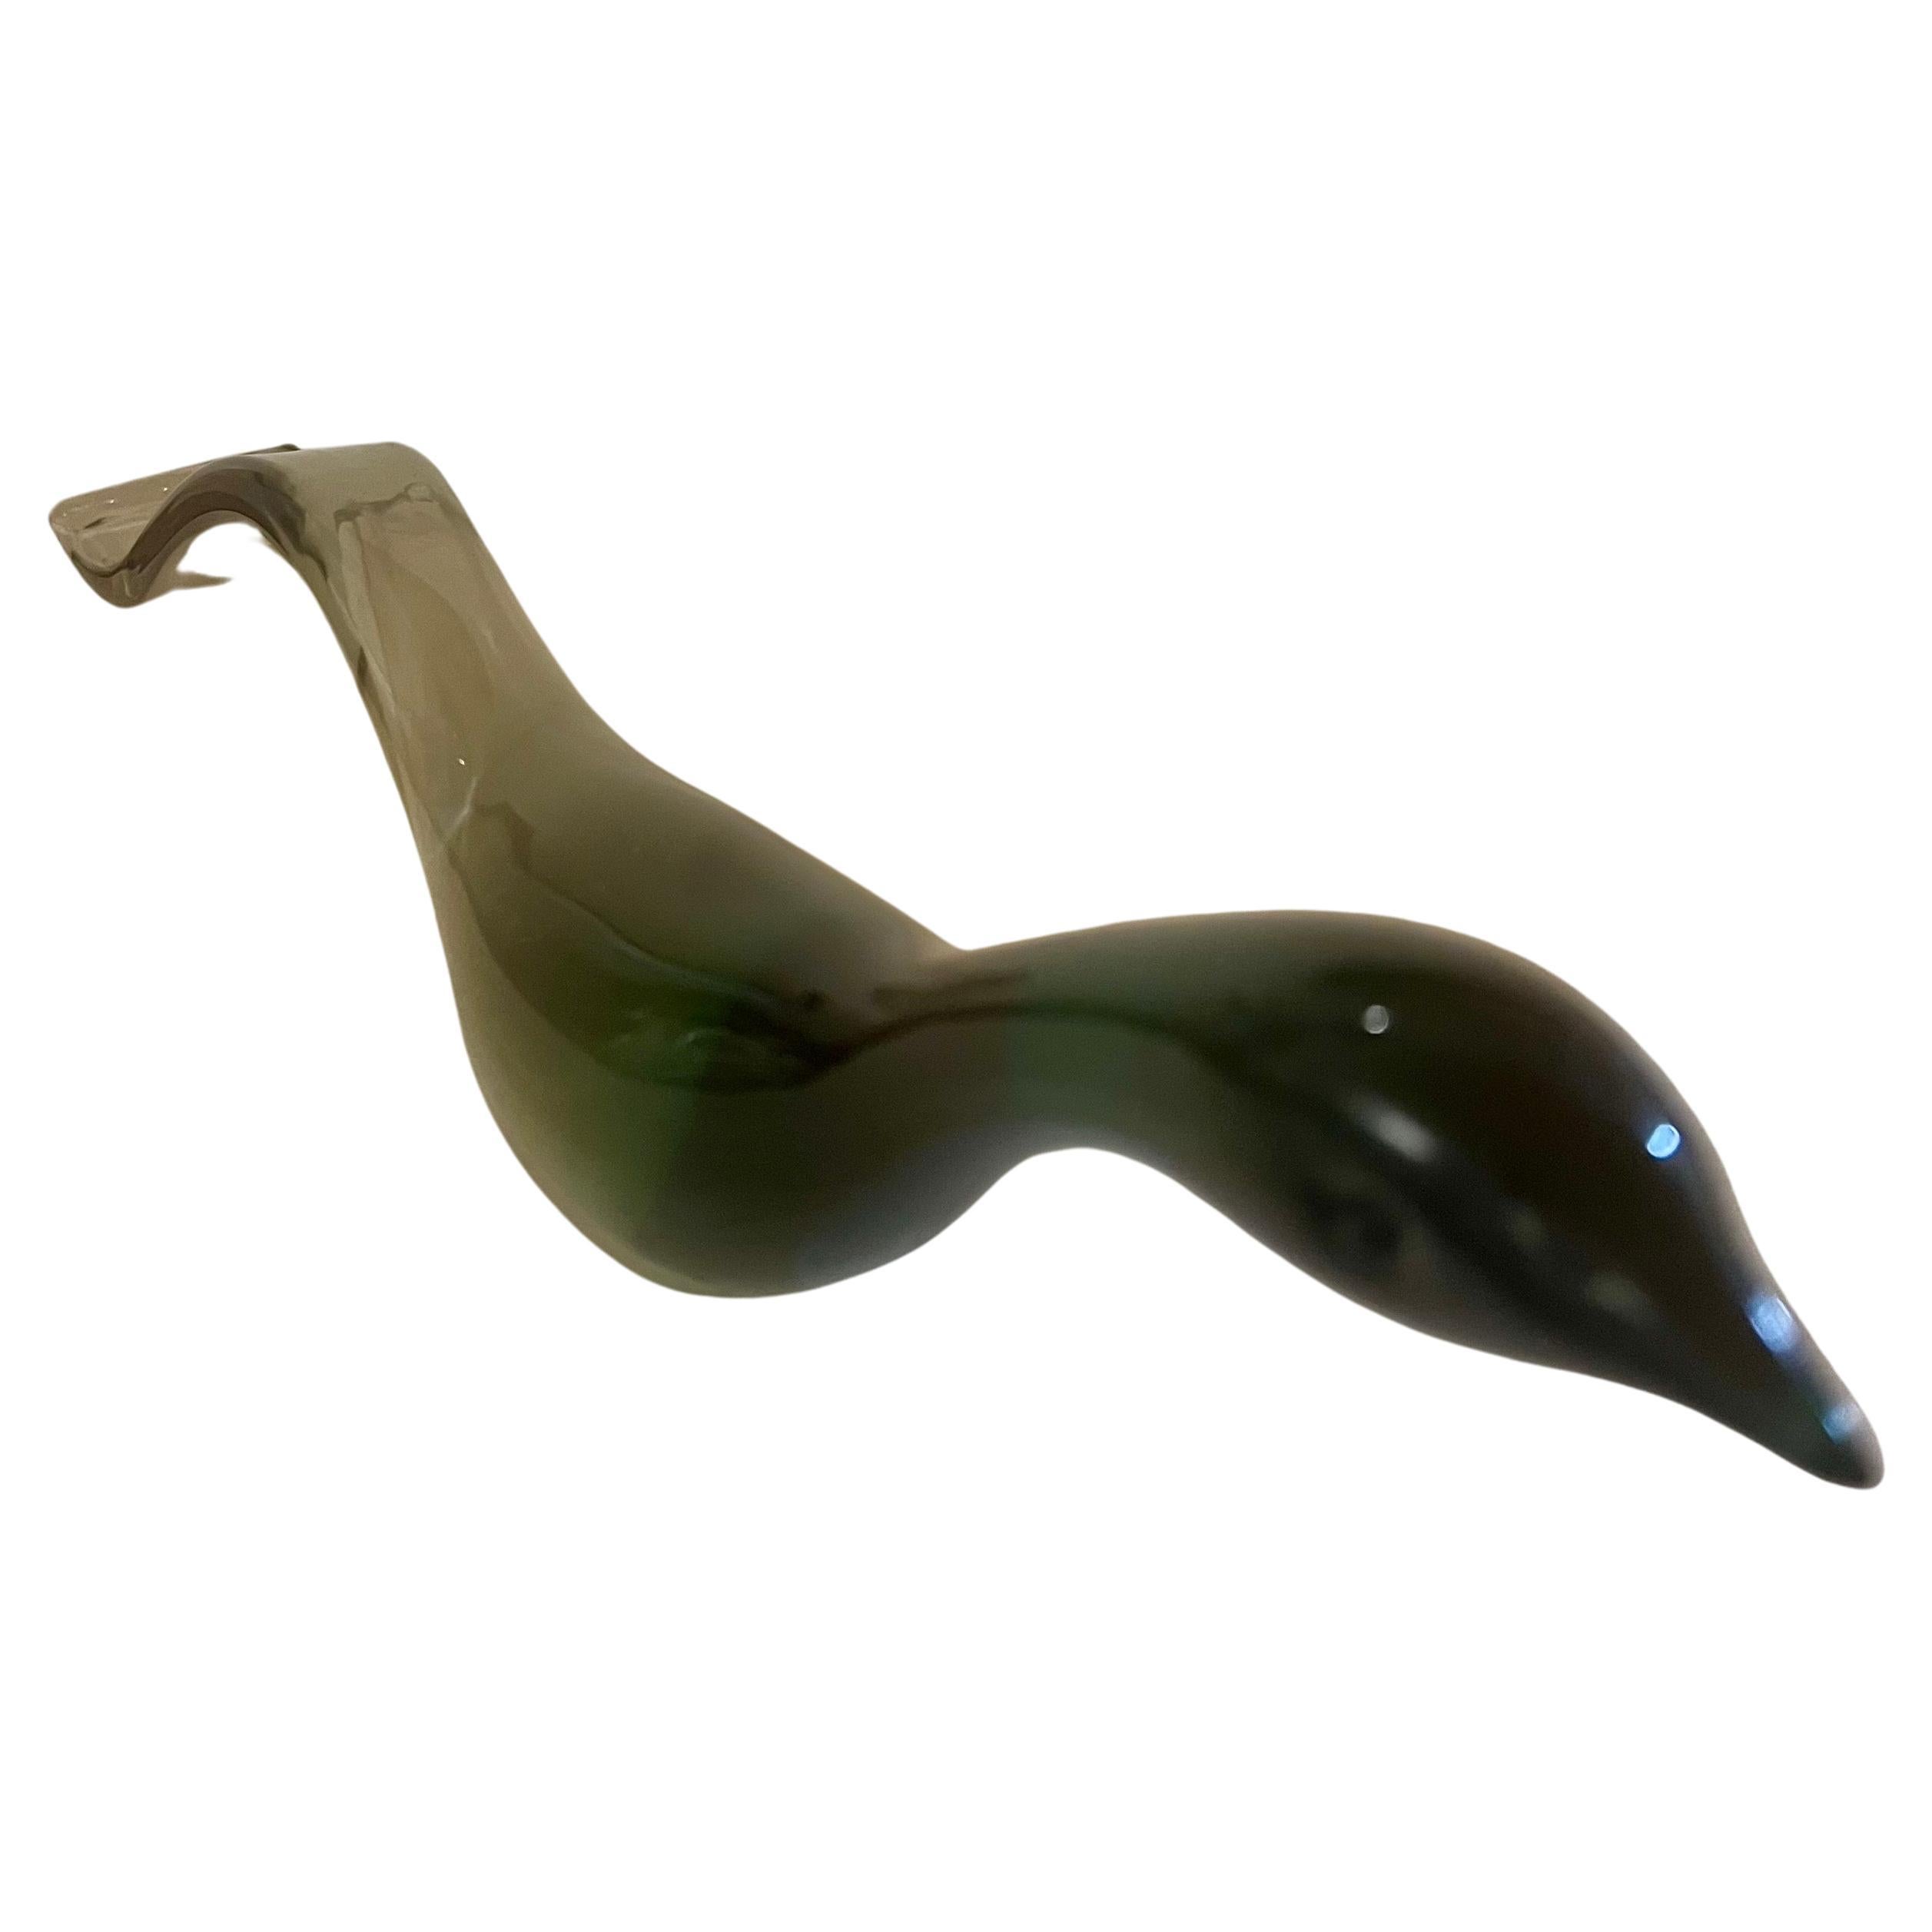 Striking signed bird sculpture by Loredano Rosin for Salviati, circa 1960's beautiful colors small chip on the pick in green and smoke tail very rare piece . sold AS/Is condition.